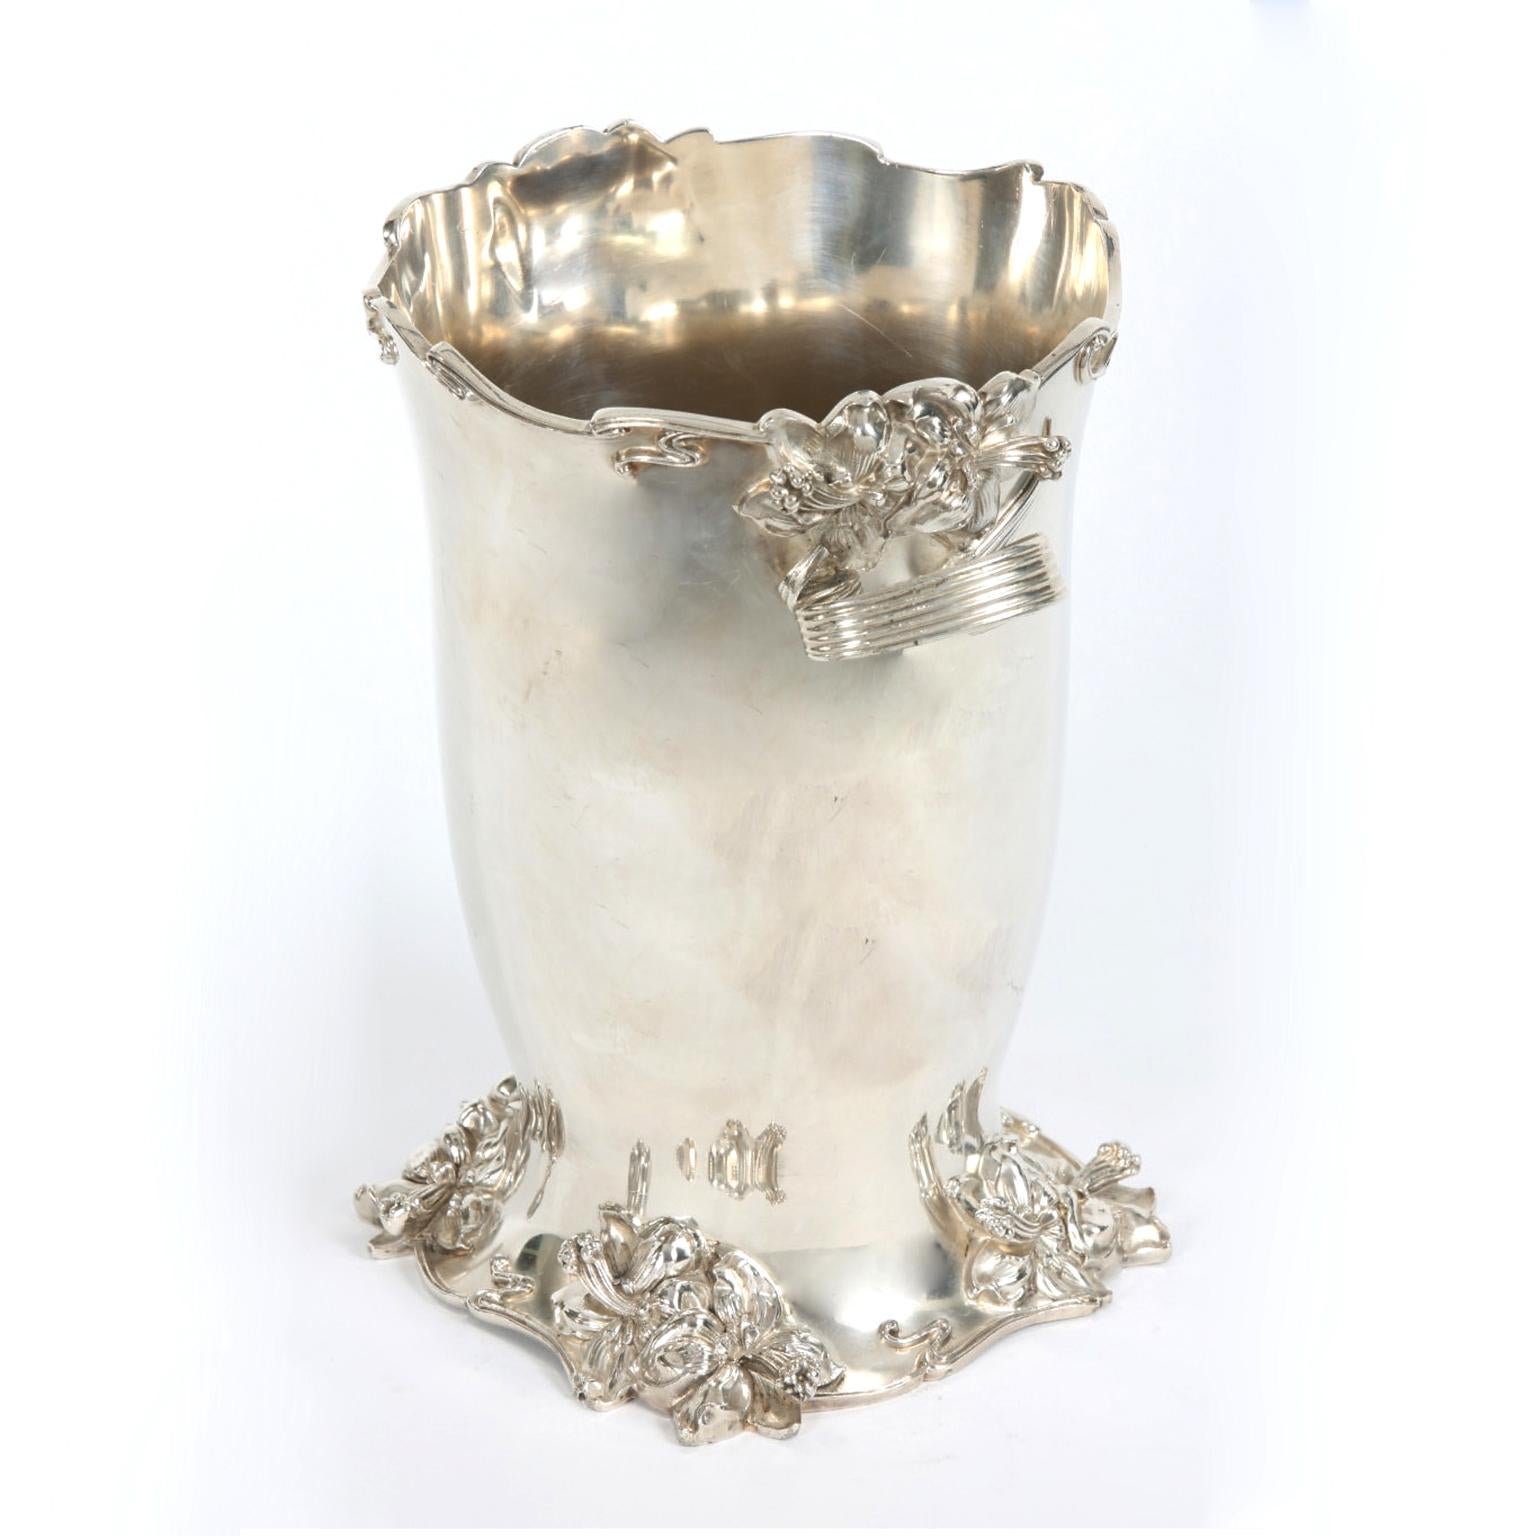 Art Nouveau Meriden silver plated wine cooler/ice bucket with side handles and exterior design details. The cooler is in great antique condition with wear appropriate with age / use. Maker's mark undersigned. The cooler measure about 10 inches high